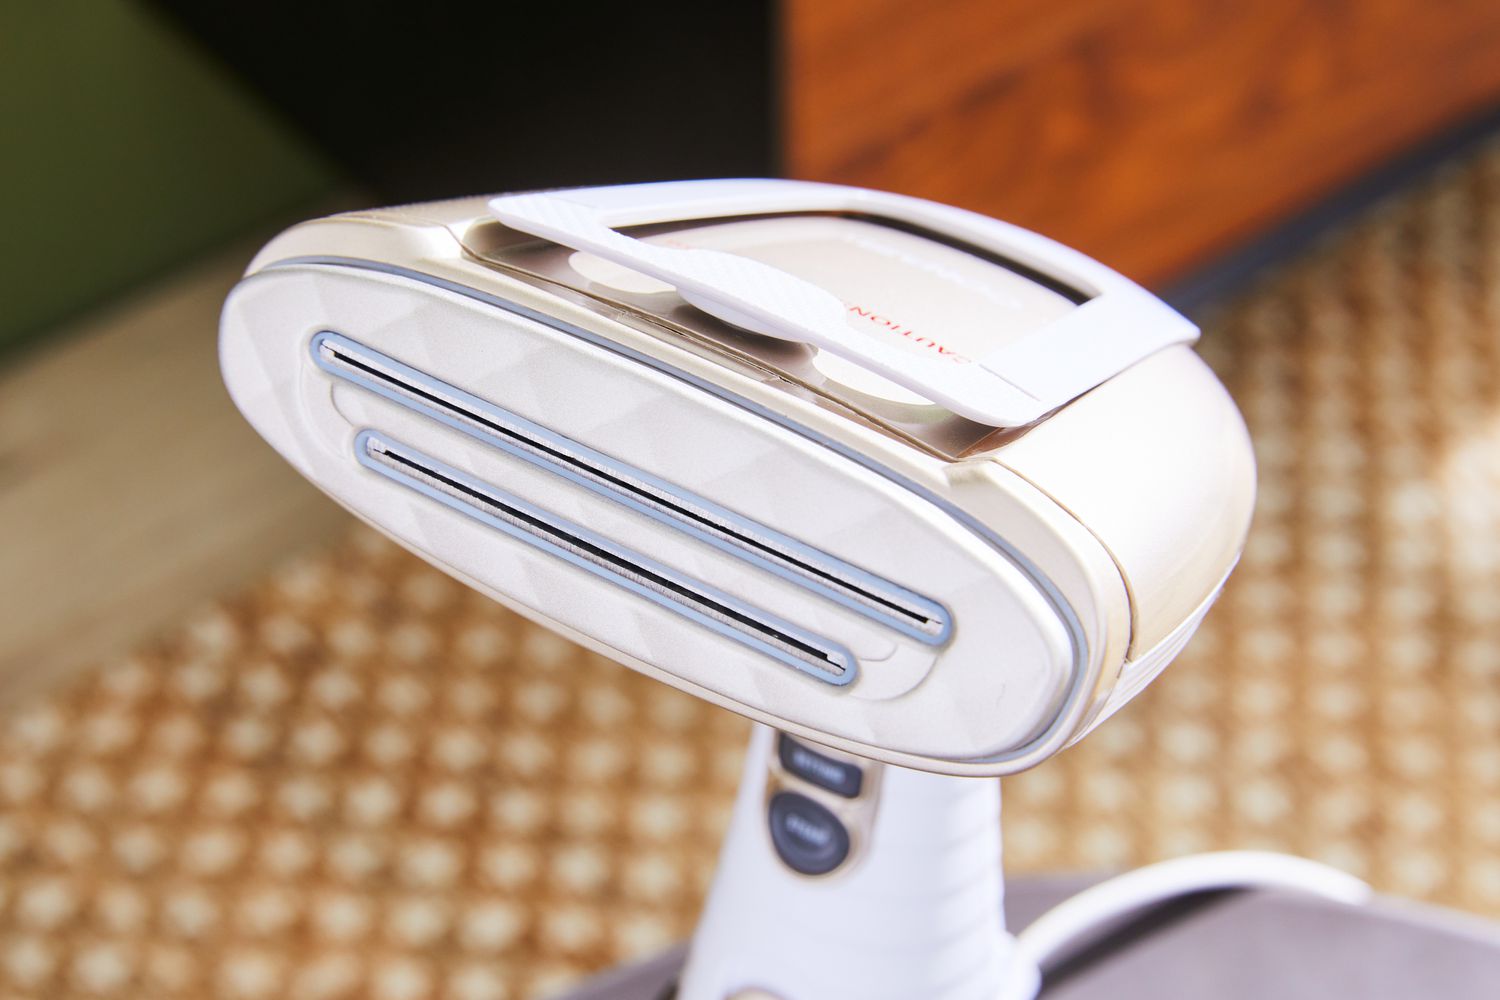 Close-up of the front on the Conair Turbo ExtremeSteam Hand-Held Fabric Steamer where the steam comes out.